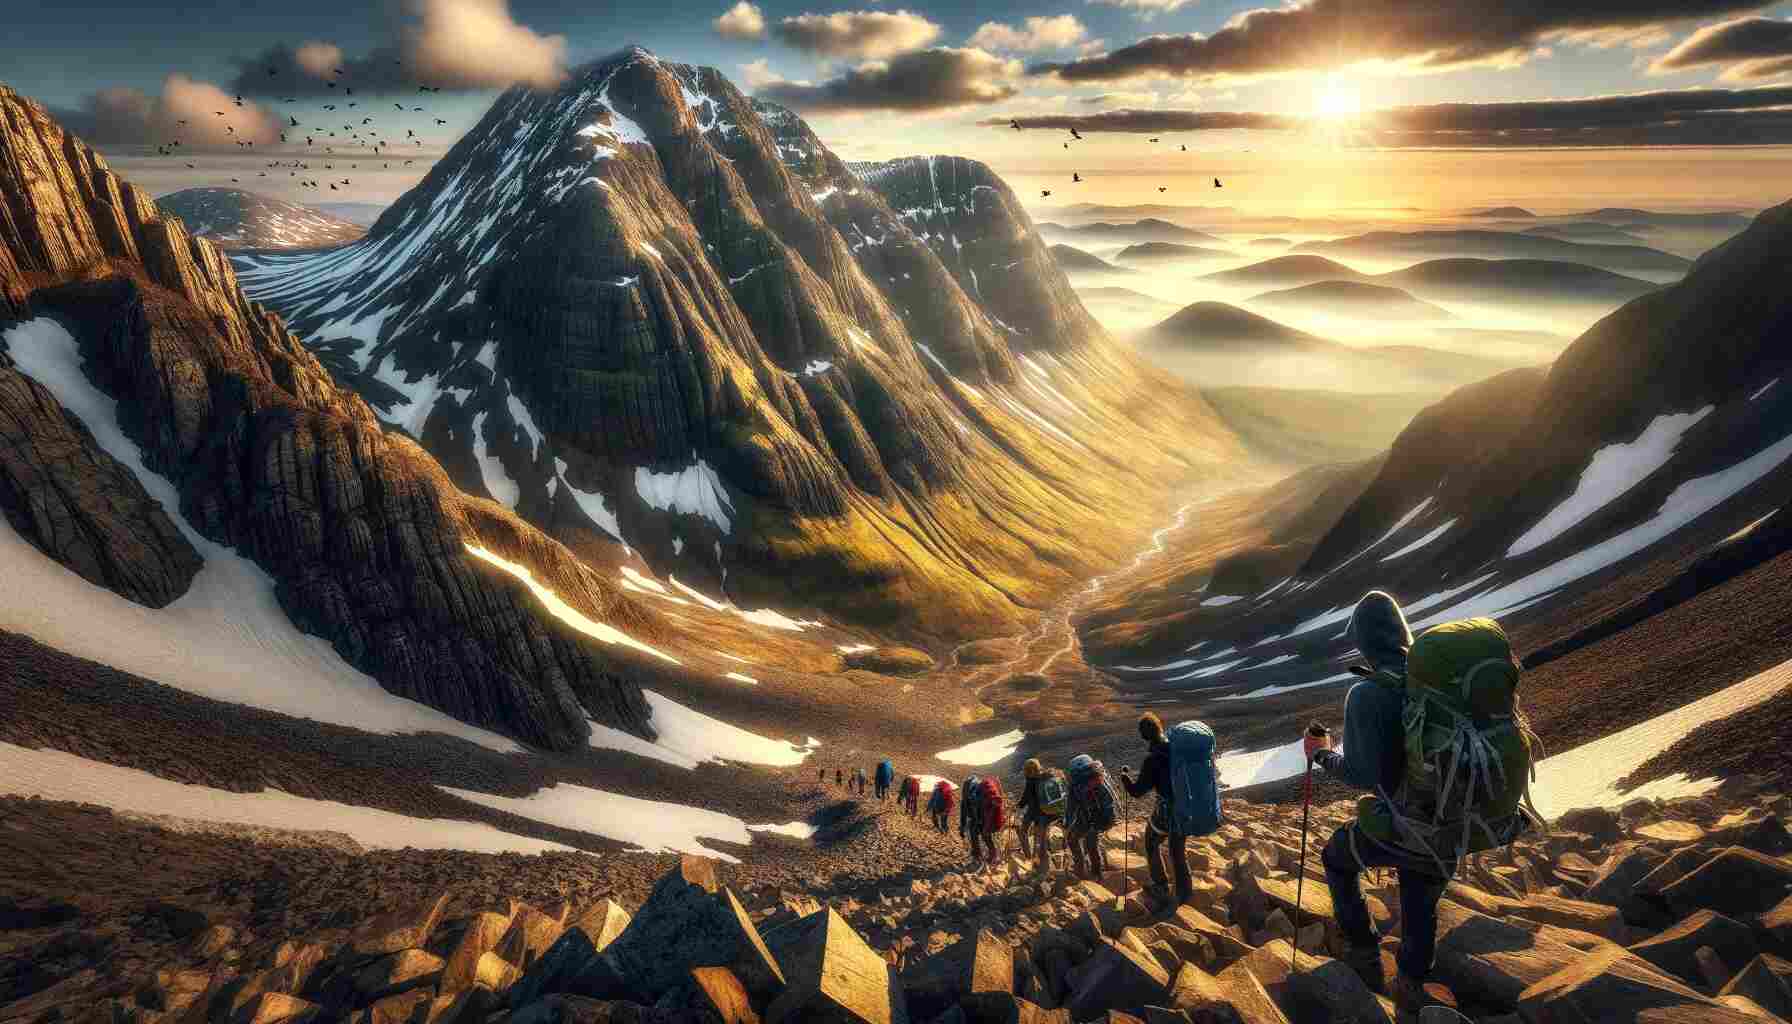 Group of hikers embarking on a challenging ascent of Ben Nevis, Scotland, with steep rocky paths and snow-capped peaks under a golden sunrise, highlighting the rugged beauty of the Scottish Highlands.